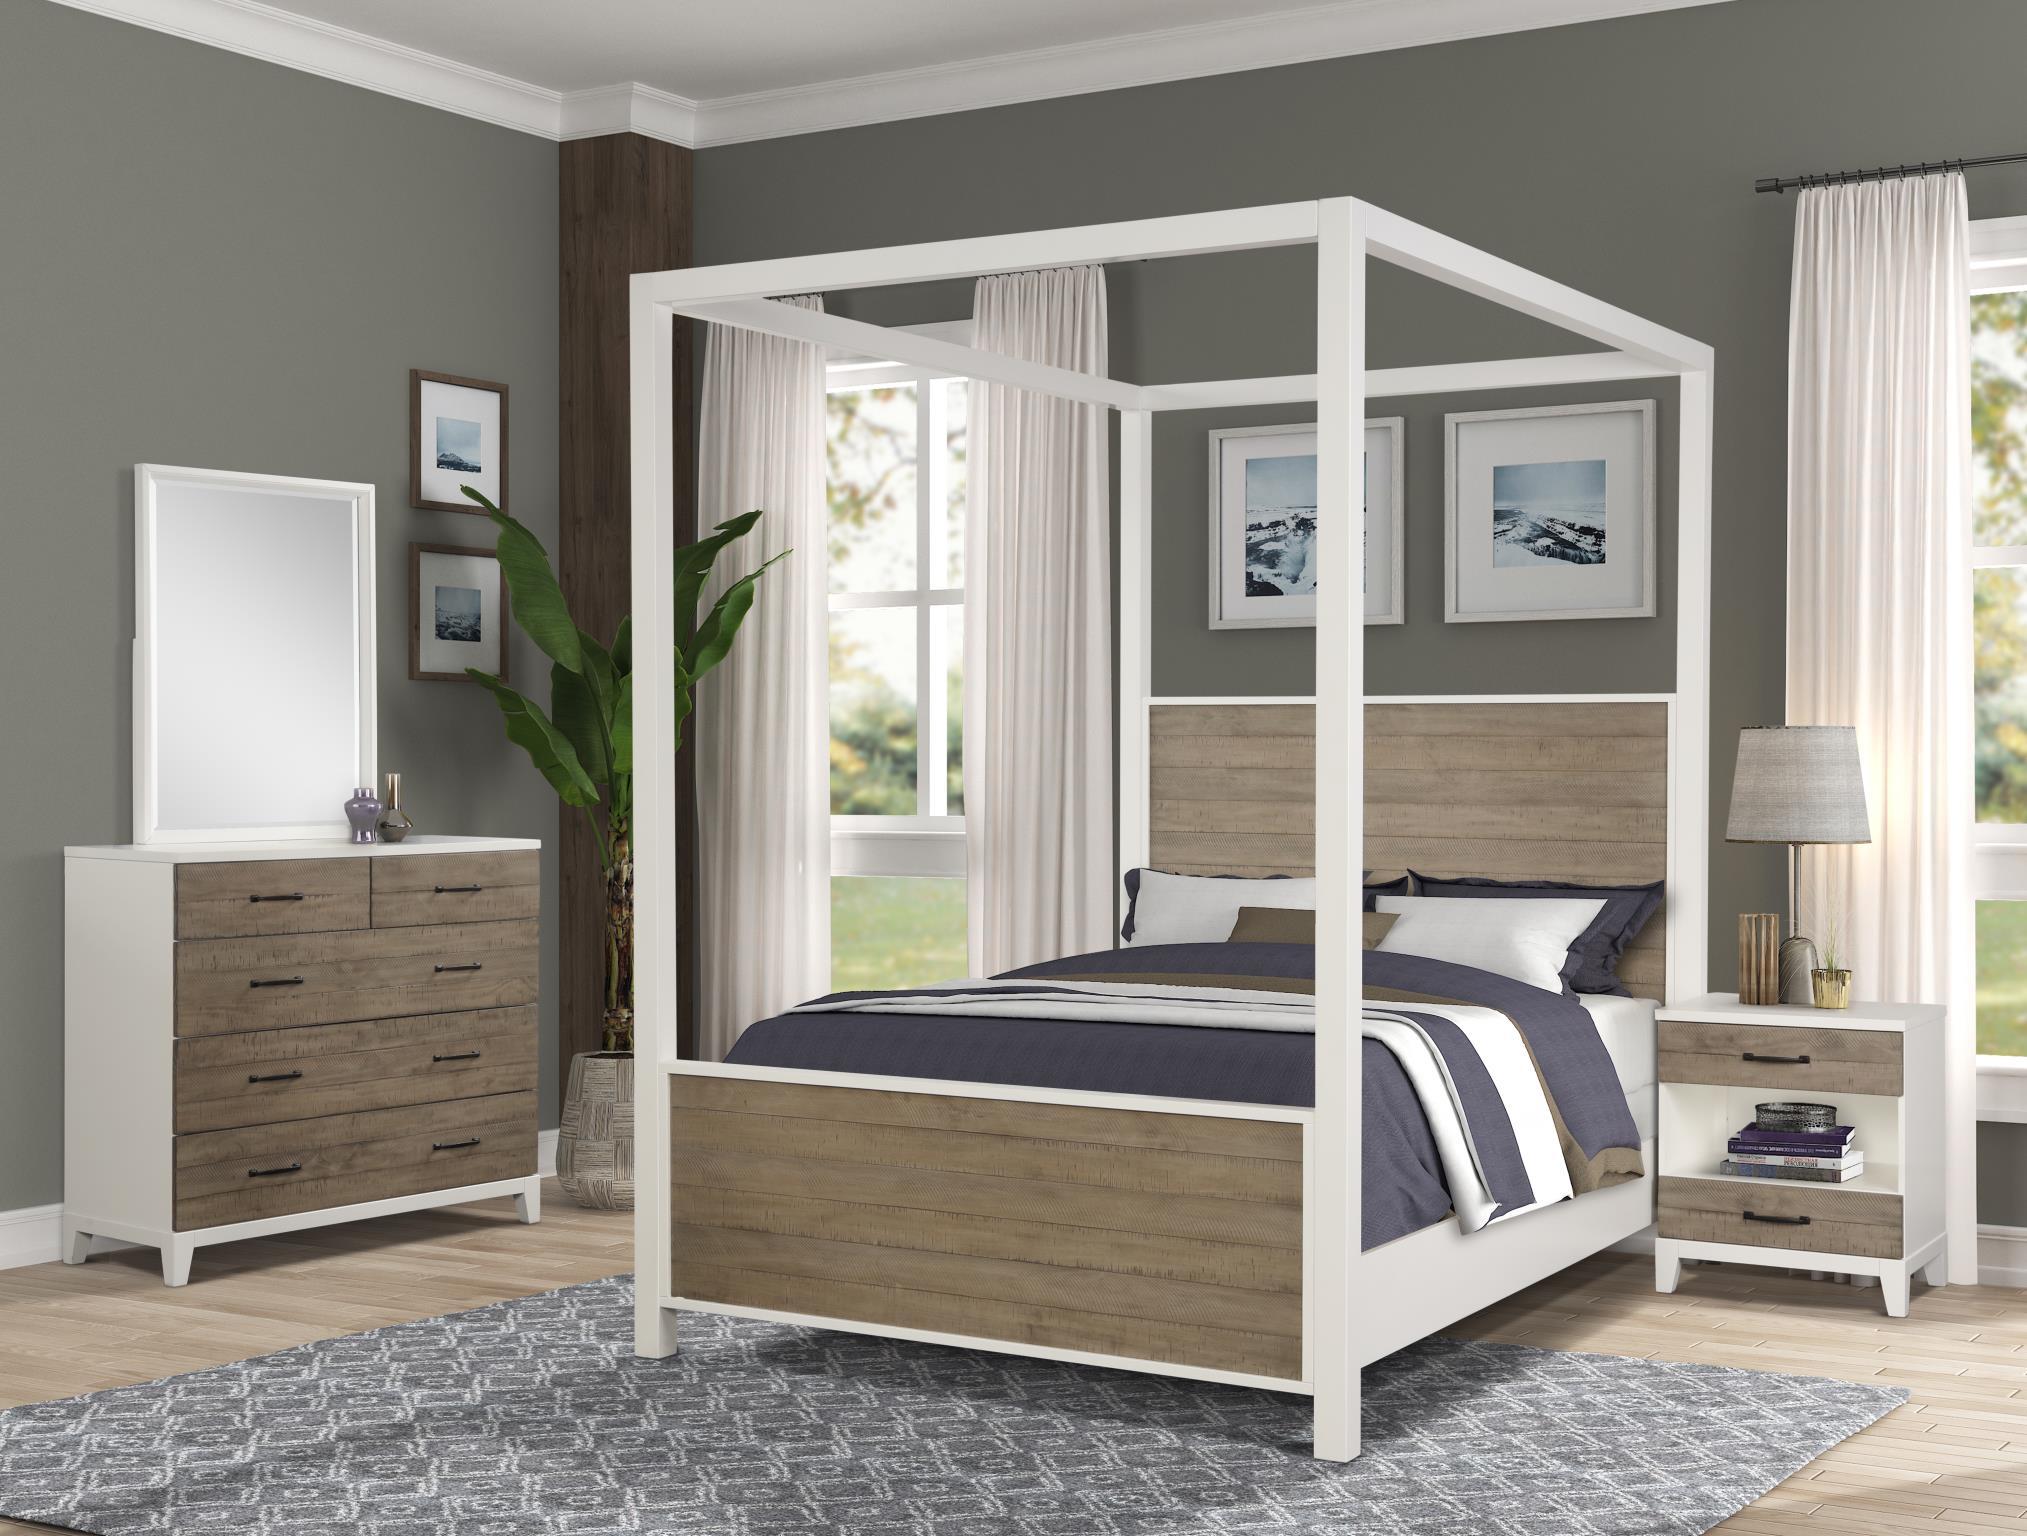 Contemporary, Transitional Canopy Bed DAYDREAMS 1288-113 1288-113 in Brown Oak 